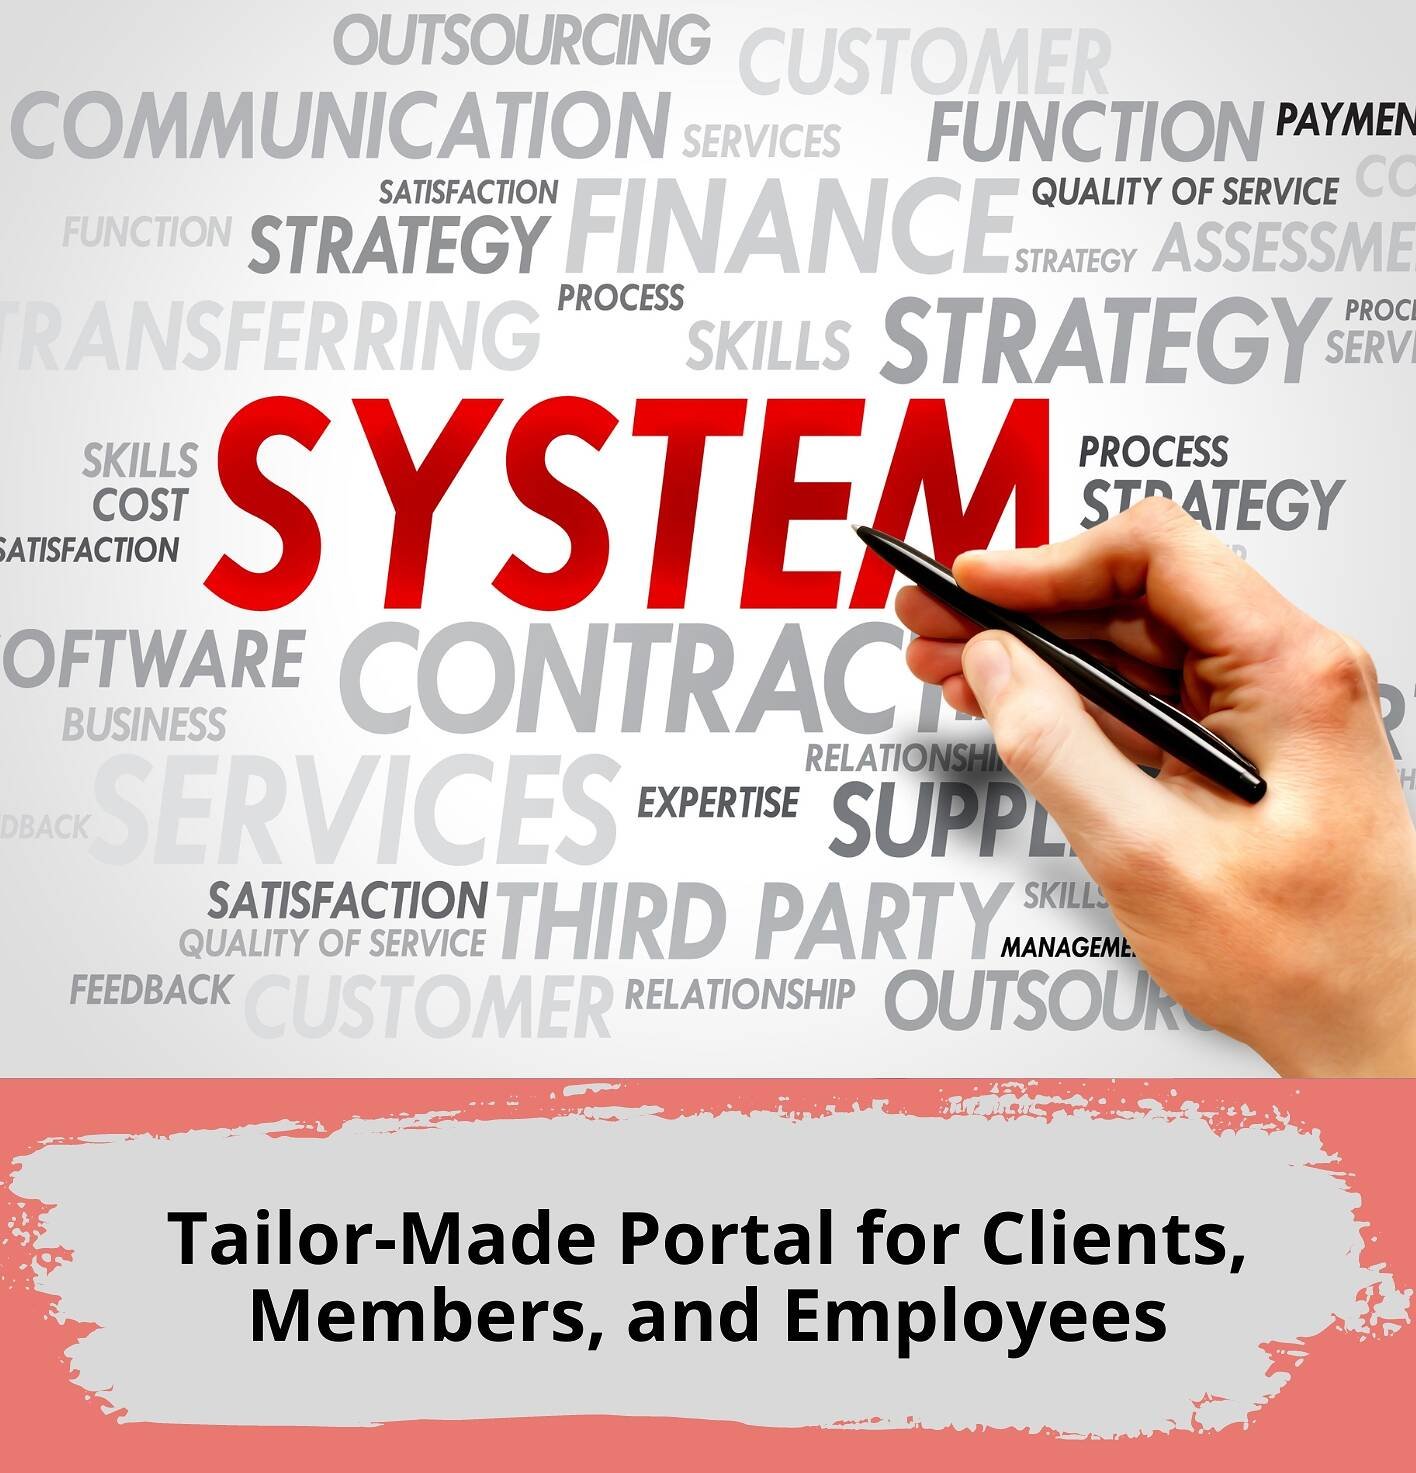 Tailor-Made Portal for Clients, Members, and Employees